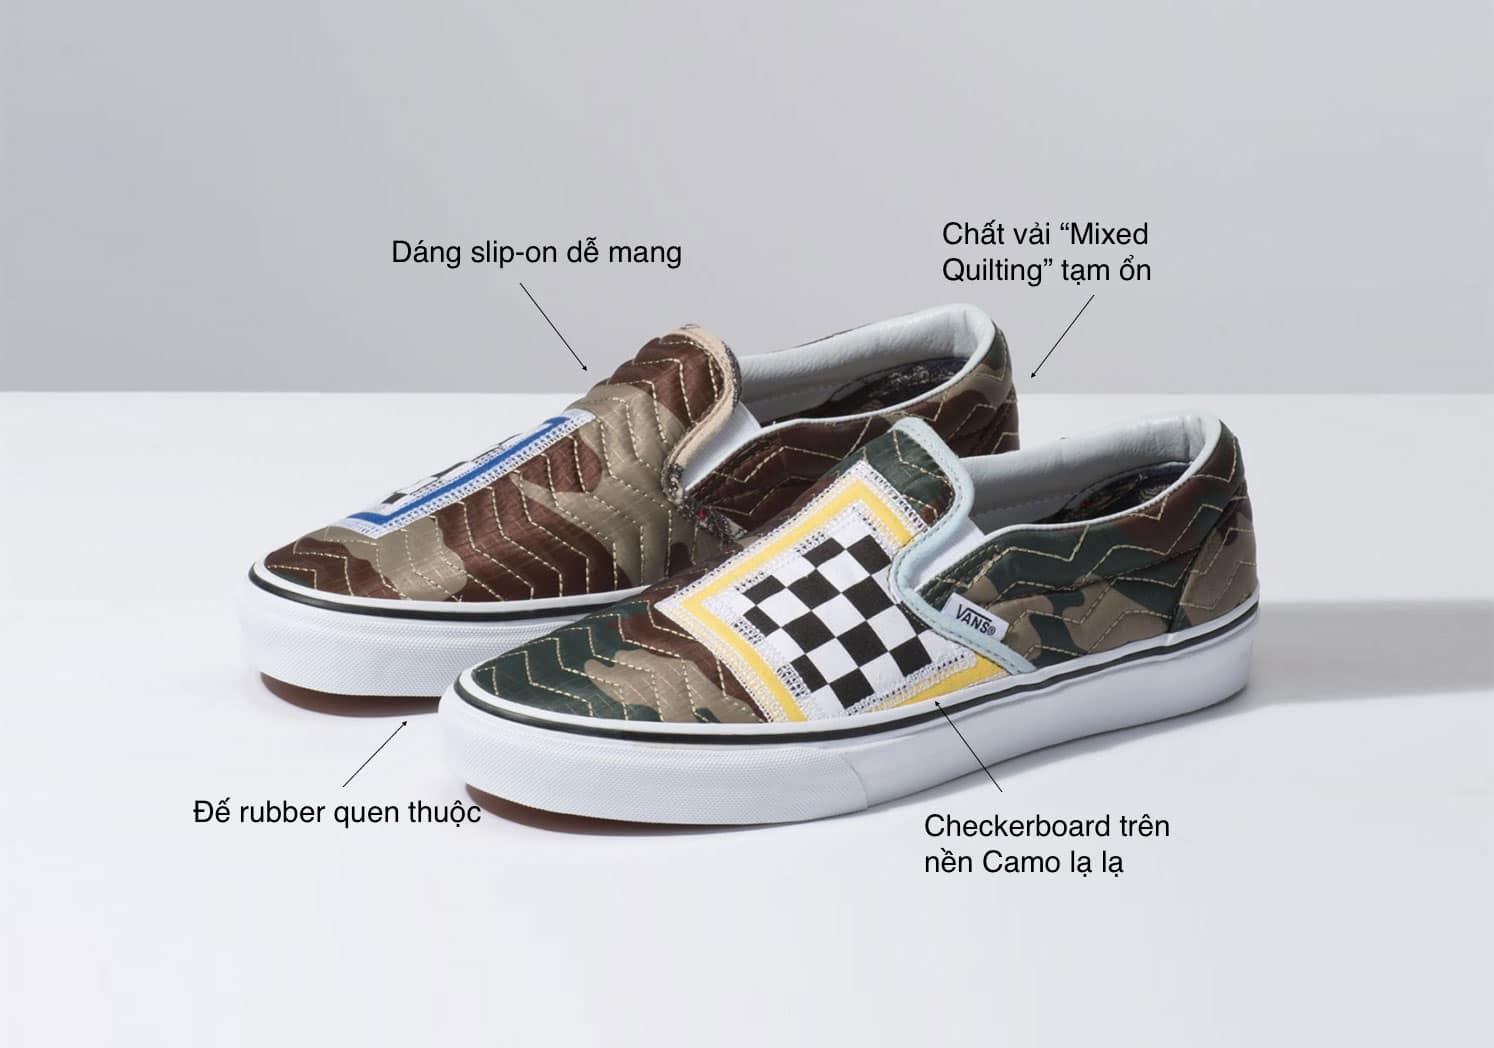 Patchwork style has never been so fun with the Vans Slip-On Camo